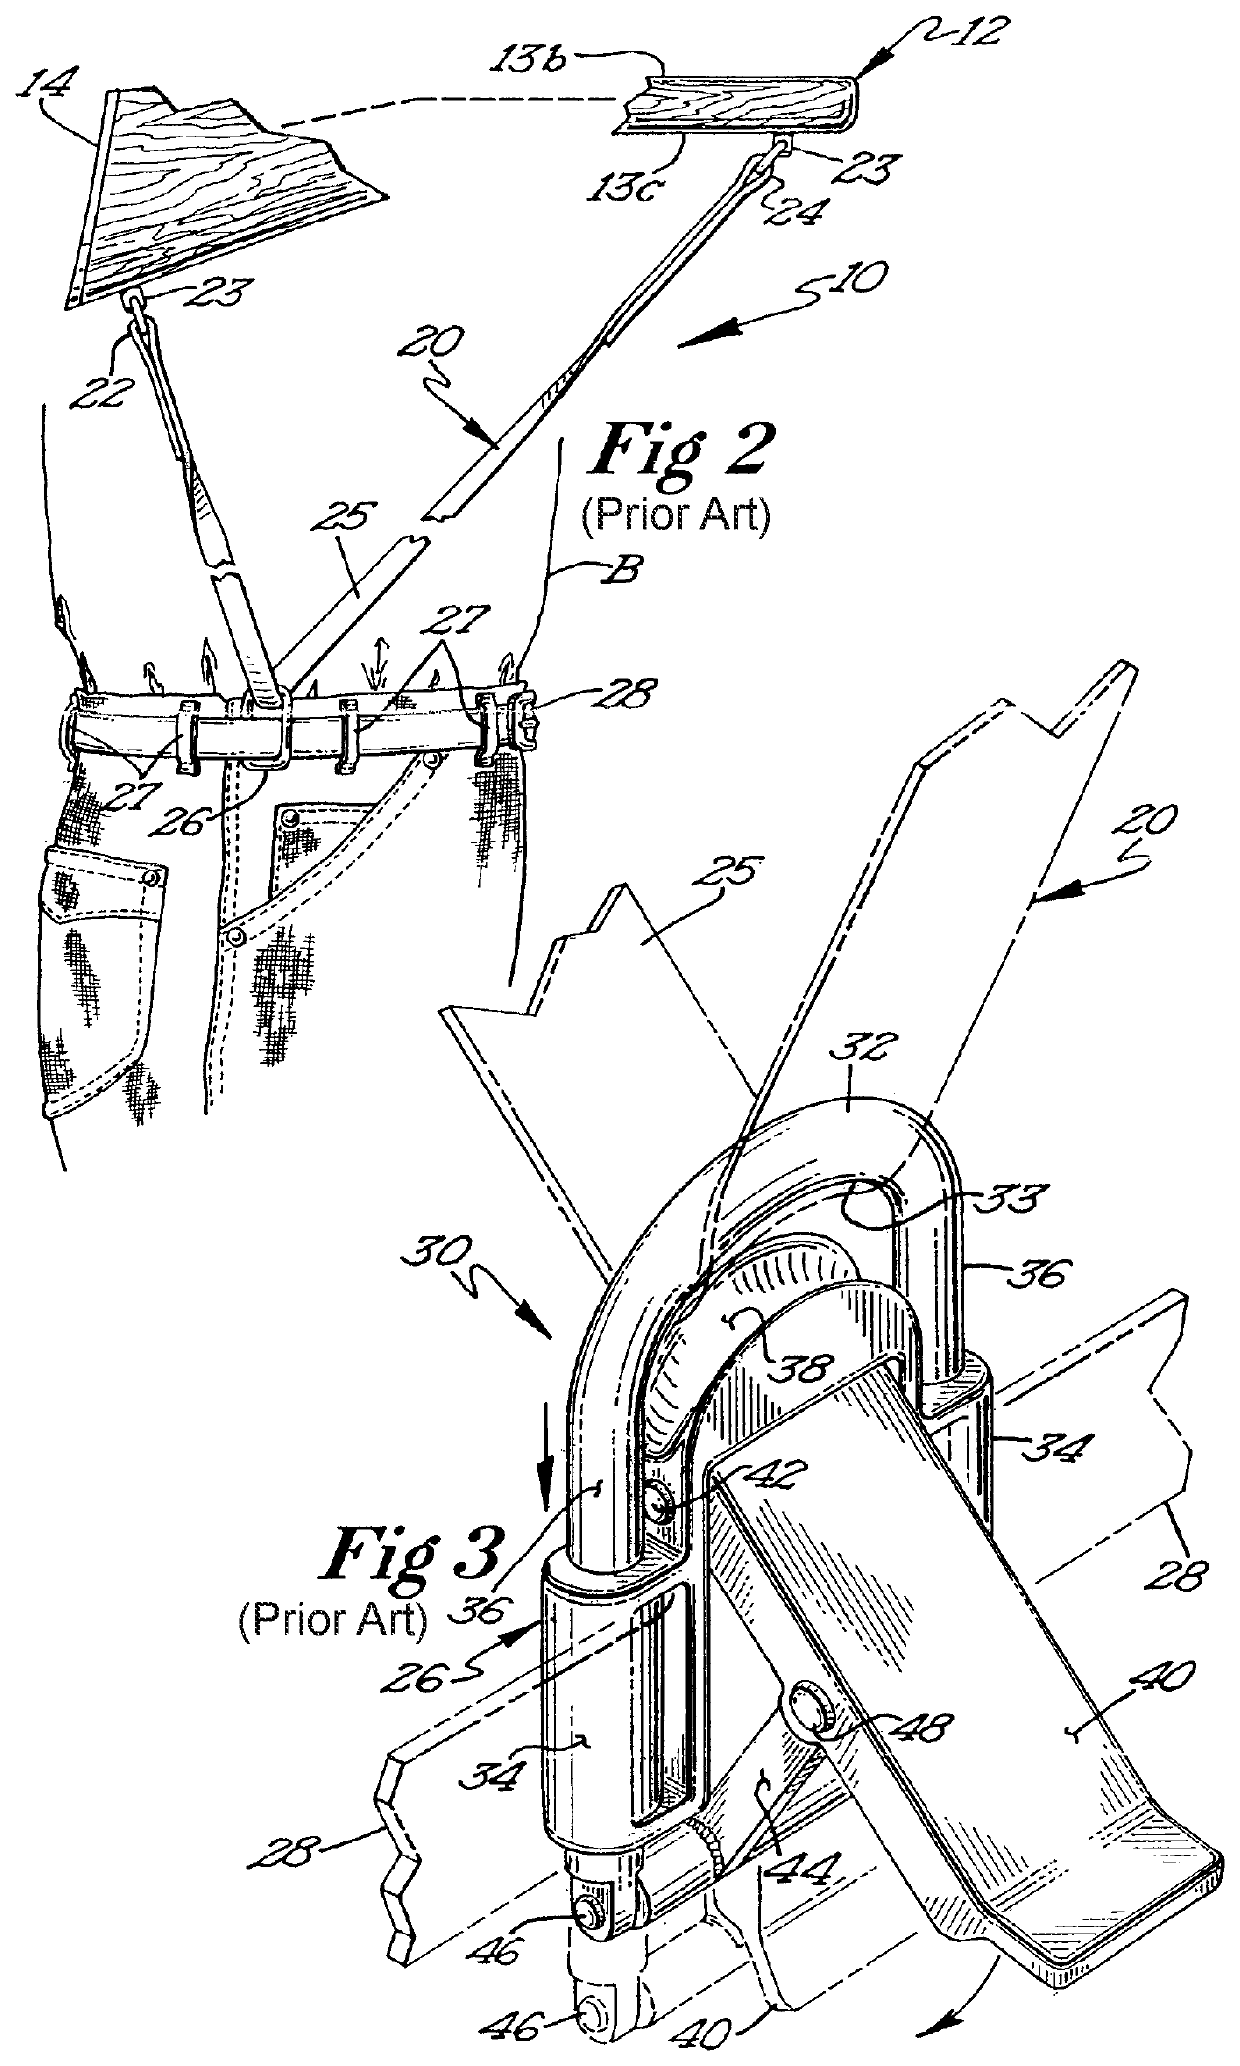 Sling clips and attachment